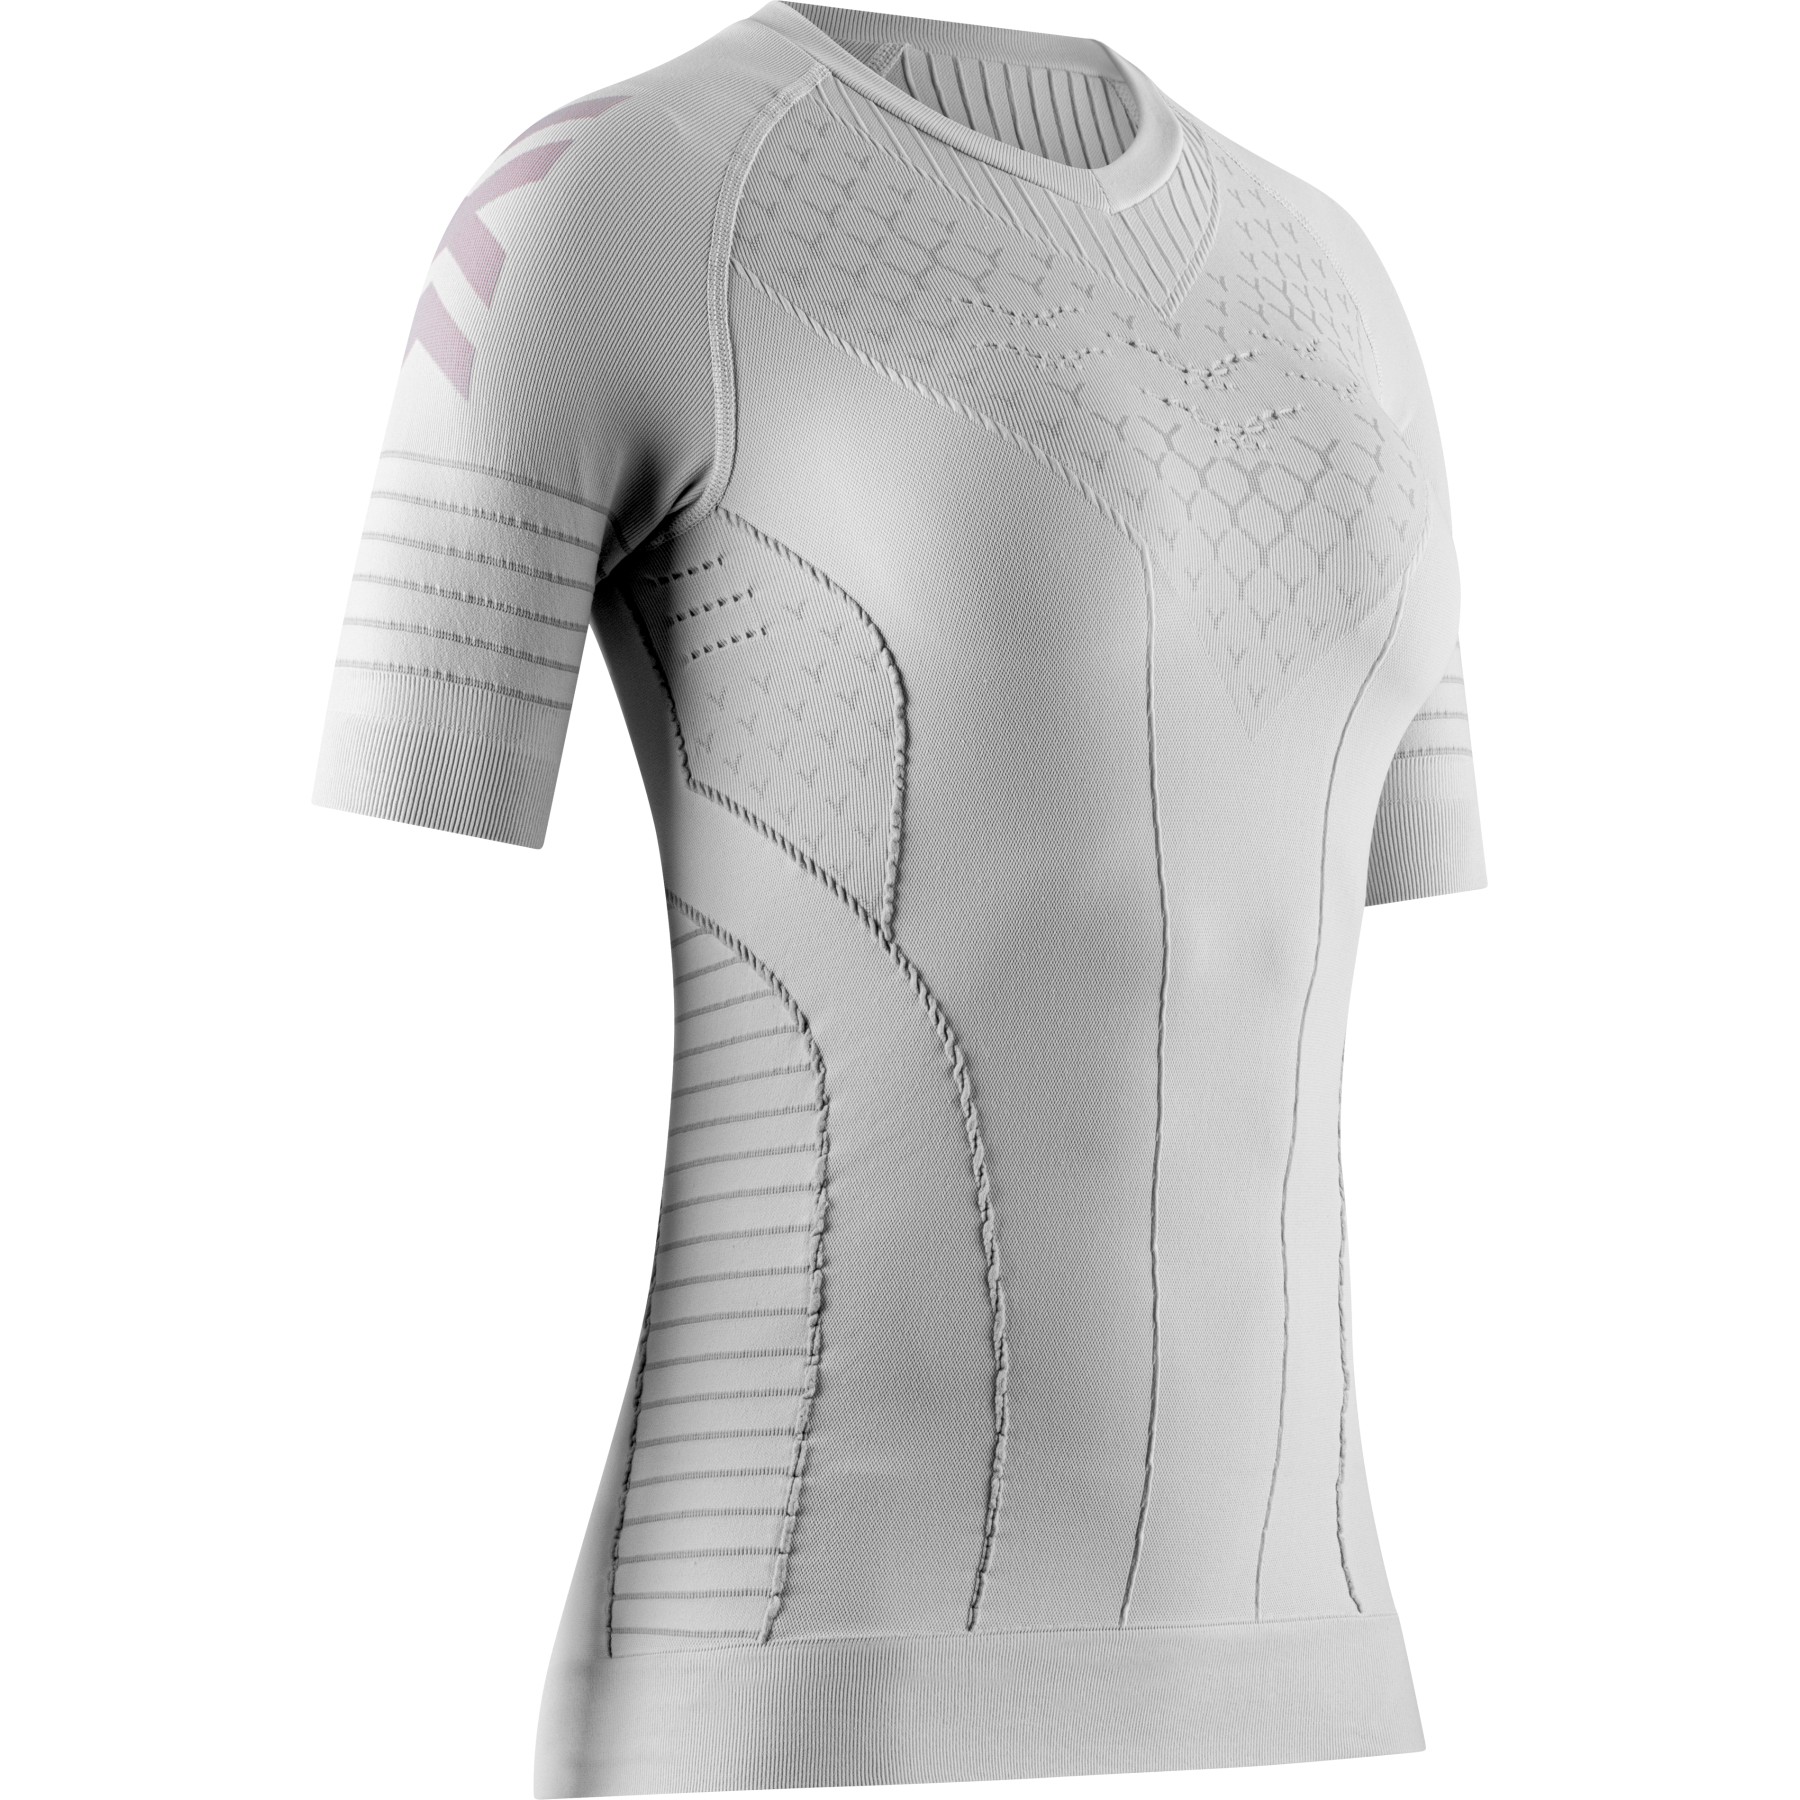 Picture of X-Bionic Twyce Race Short Sleeve Shirt Women - arctic white/pearl grey